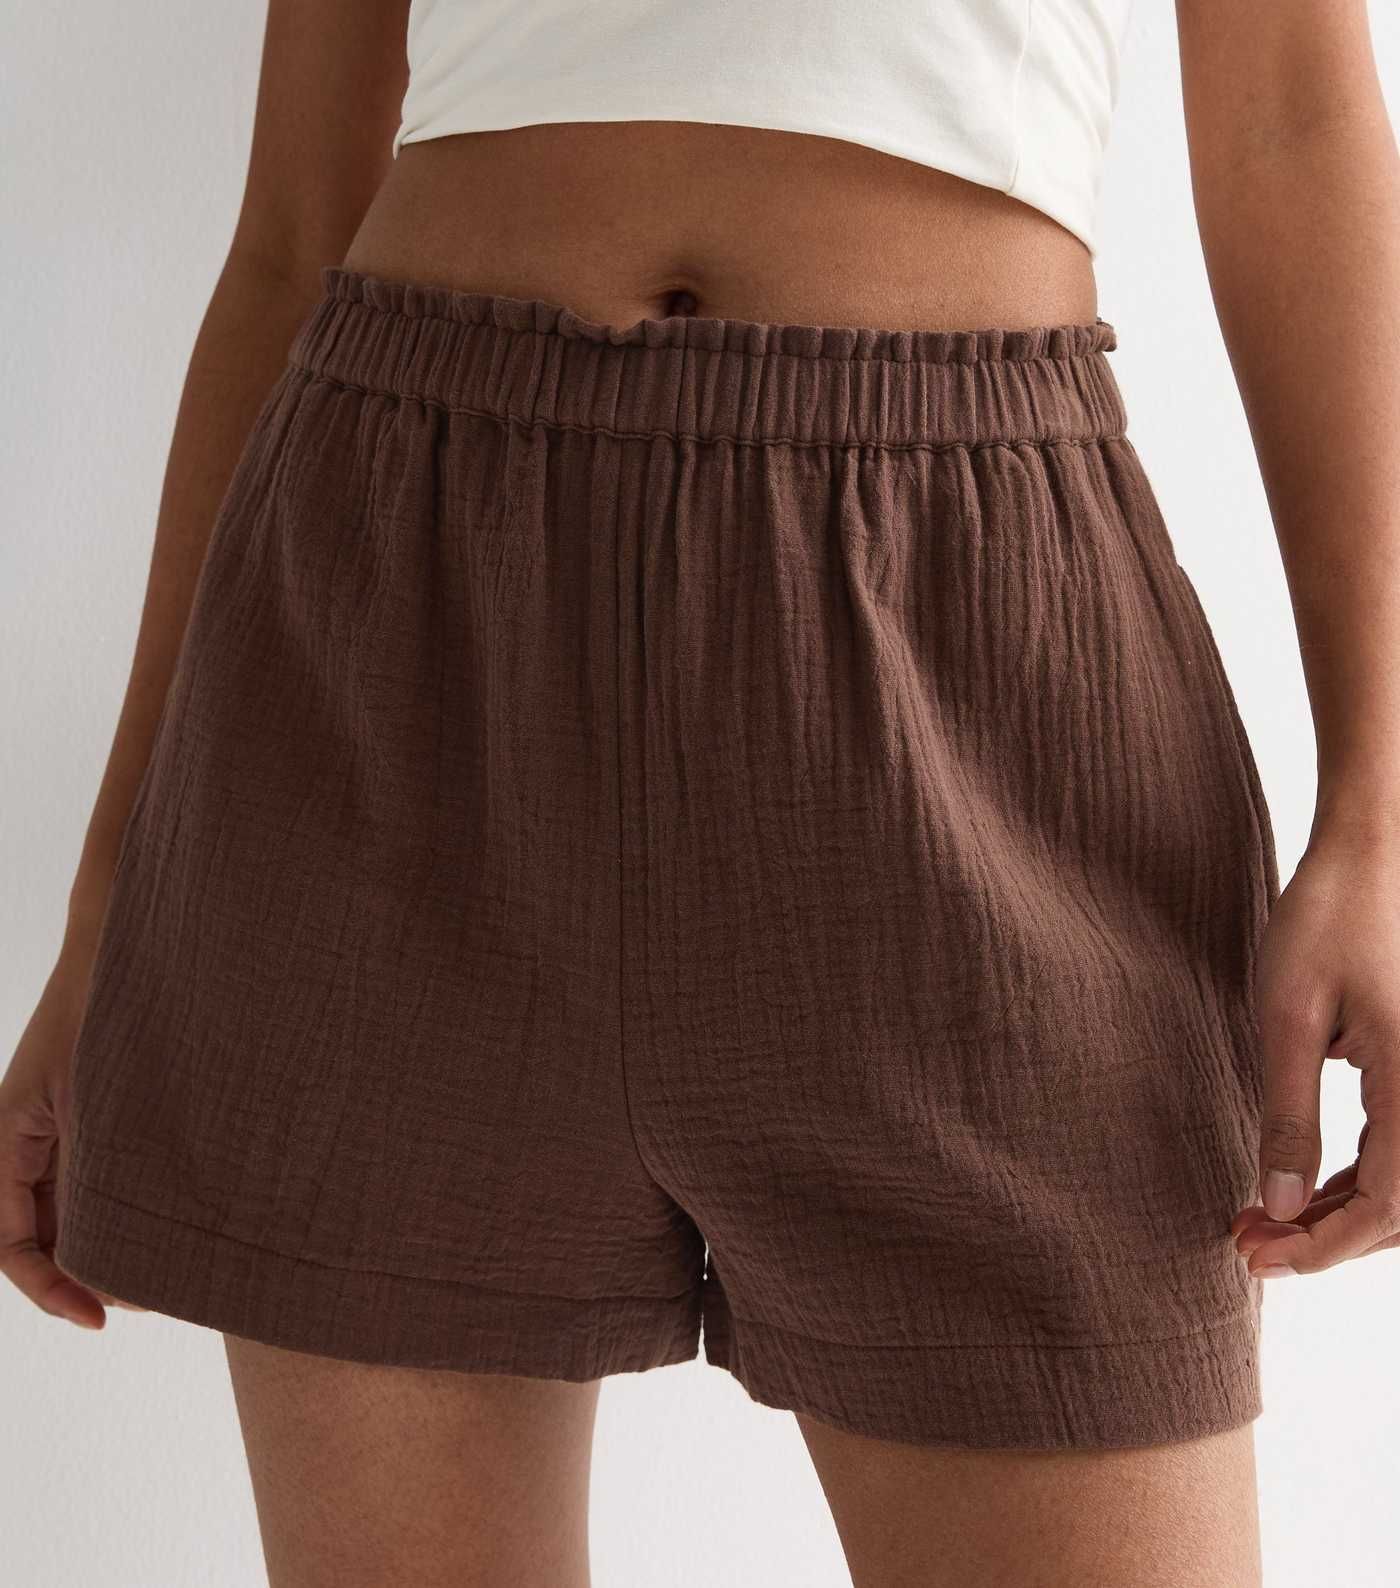 Brown Textured Cotton Shorts
						
						Add to Saved Items
						Remove from Saved Items | New Look (UK)